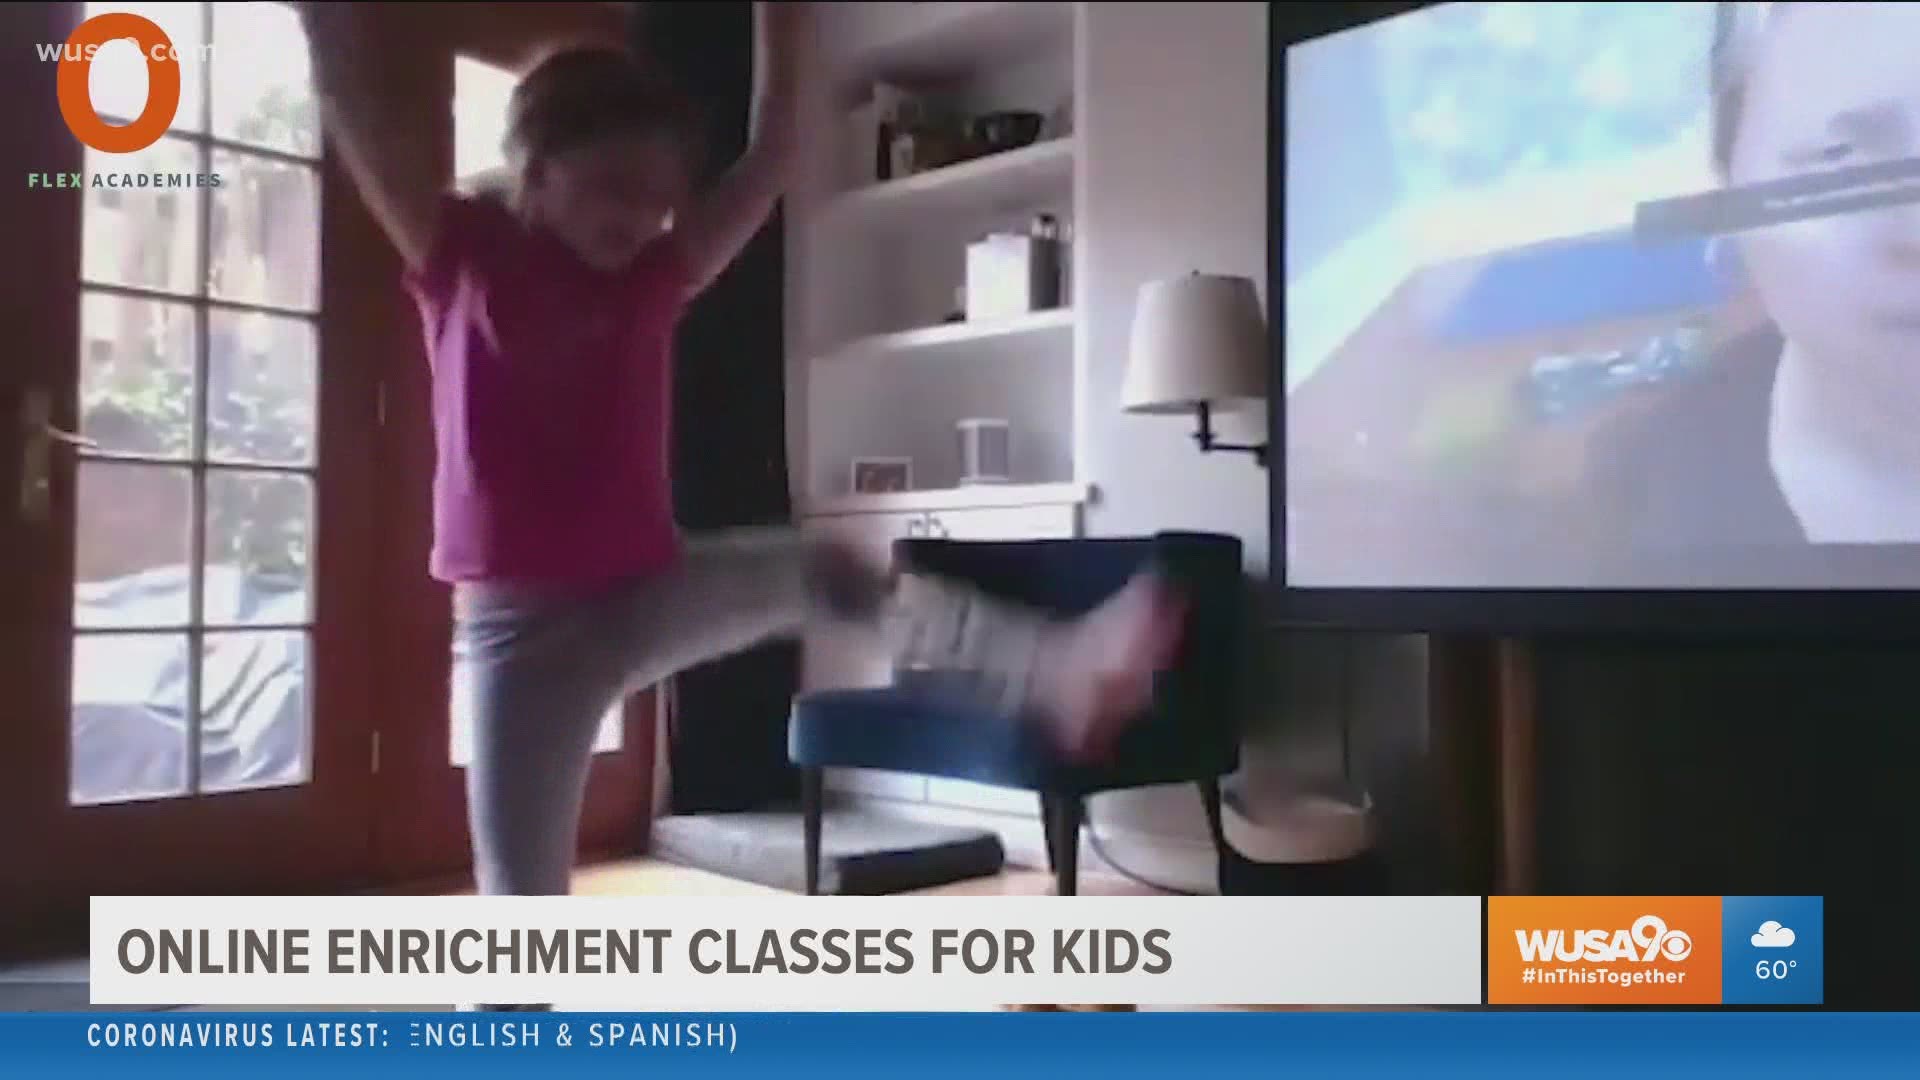 Joshua Chernikoff, founder of Flex Academies explains the criteria that parents should seek while checking out online enrichment classes for their kids this summer.